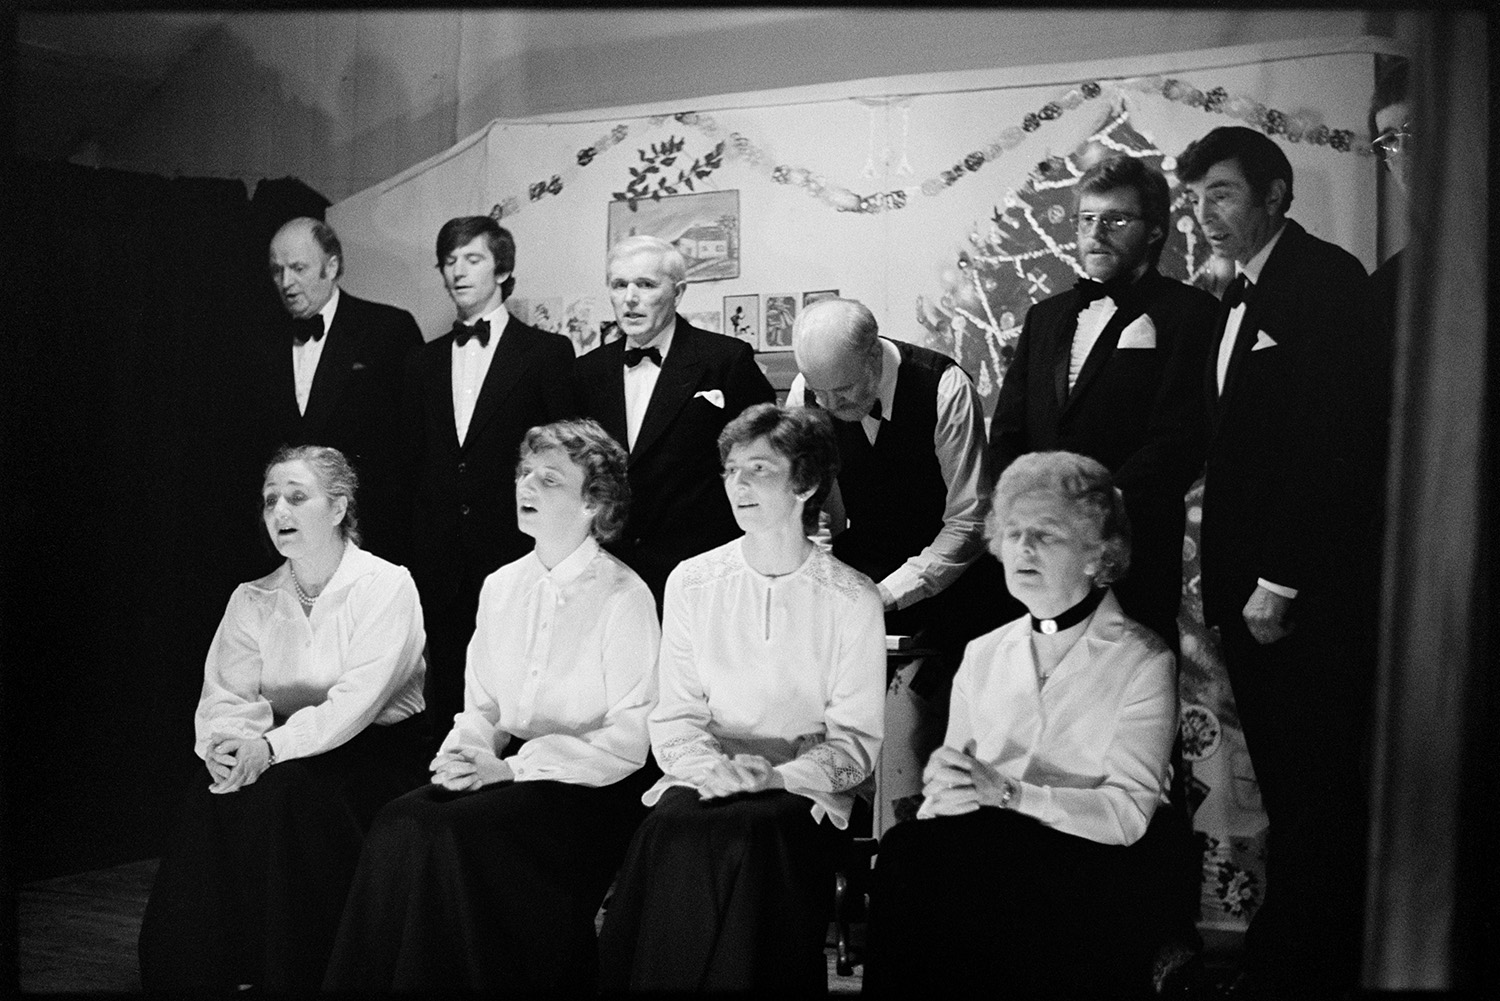 Christmas entertainment in village hall, choir singing to pianist.
[A choir of women and men singing on stage at High Bickington village hall at an evening of Christmas entertainment. The women are all wearing white shirts and the men are wearing bow ties.]